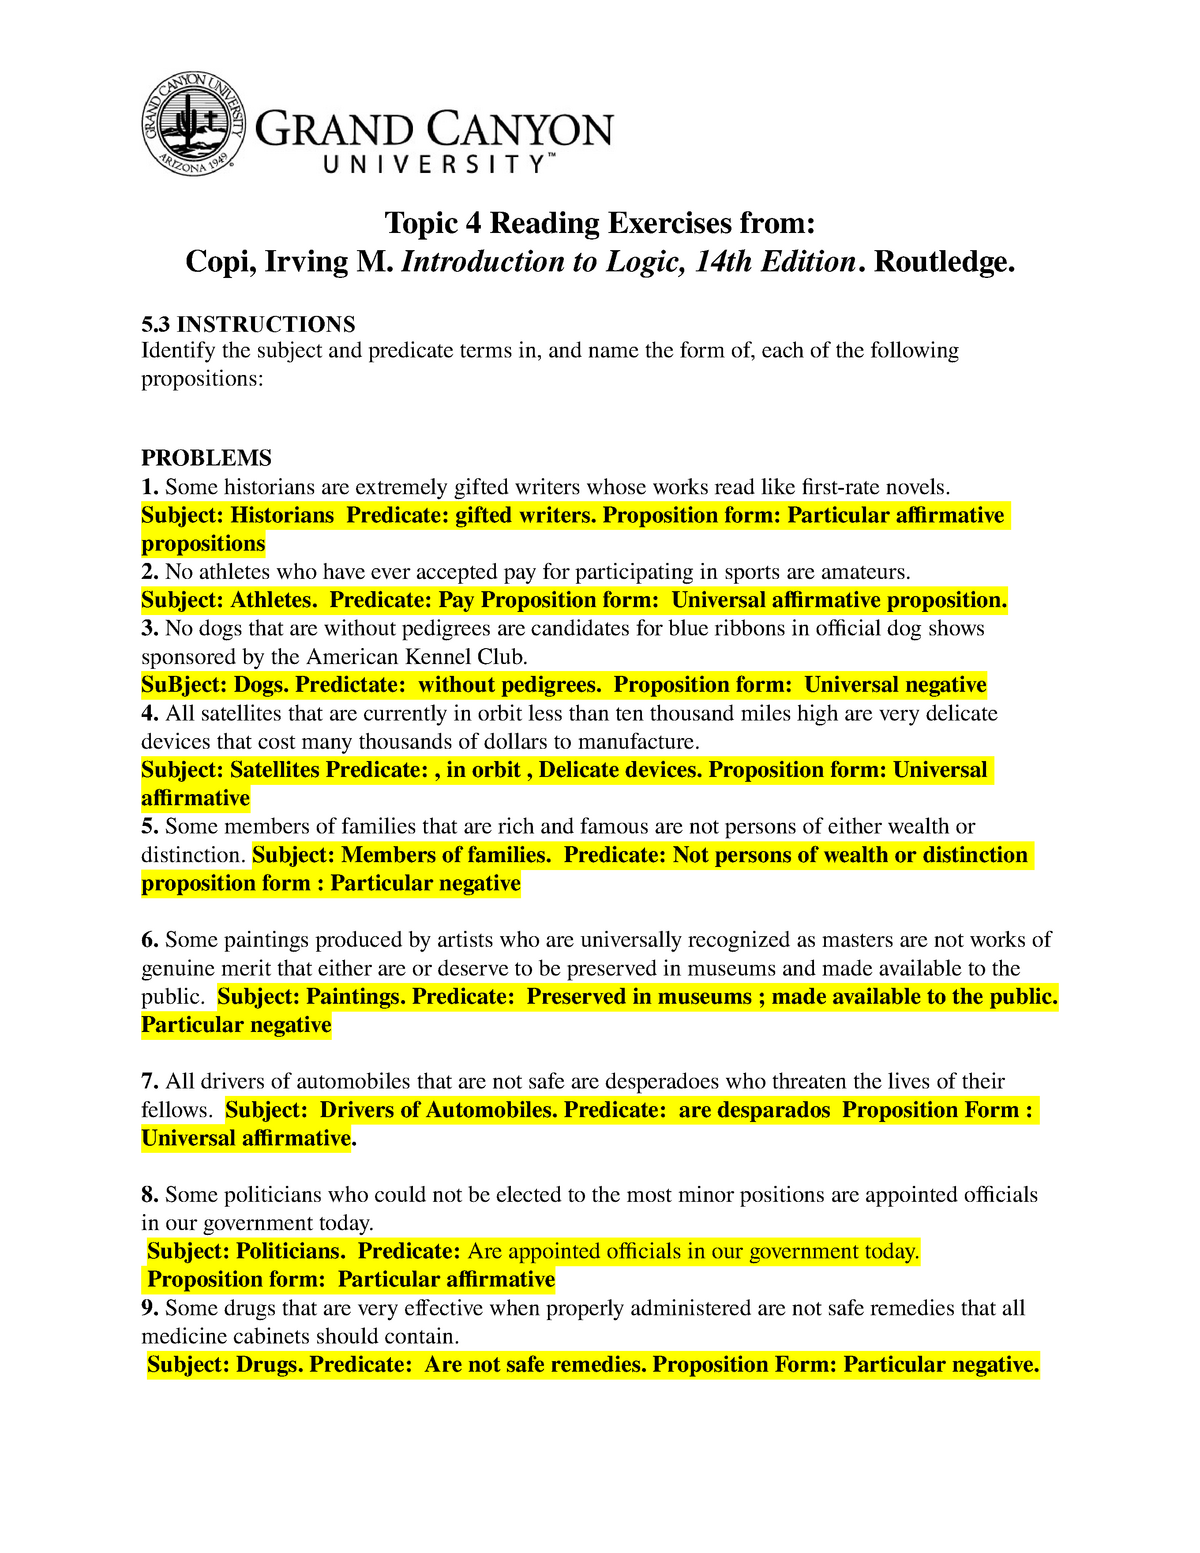 COM362 T4 Reading Exercises - Topic 4 Reading Exercises from: Copi 